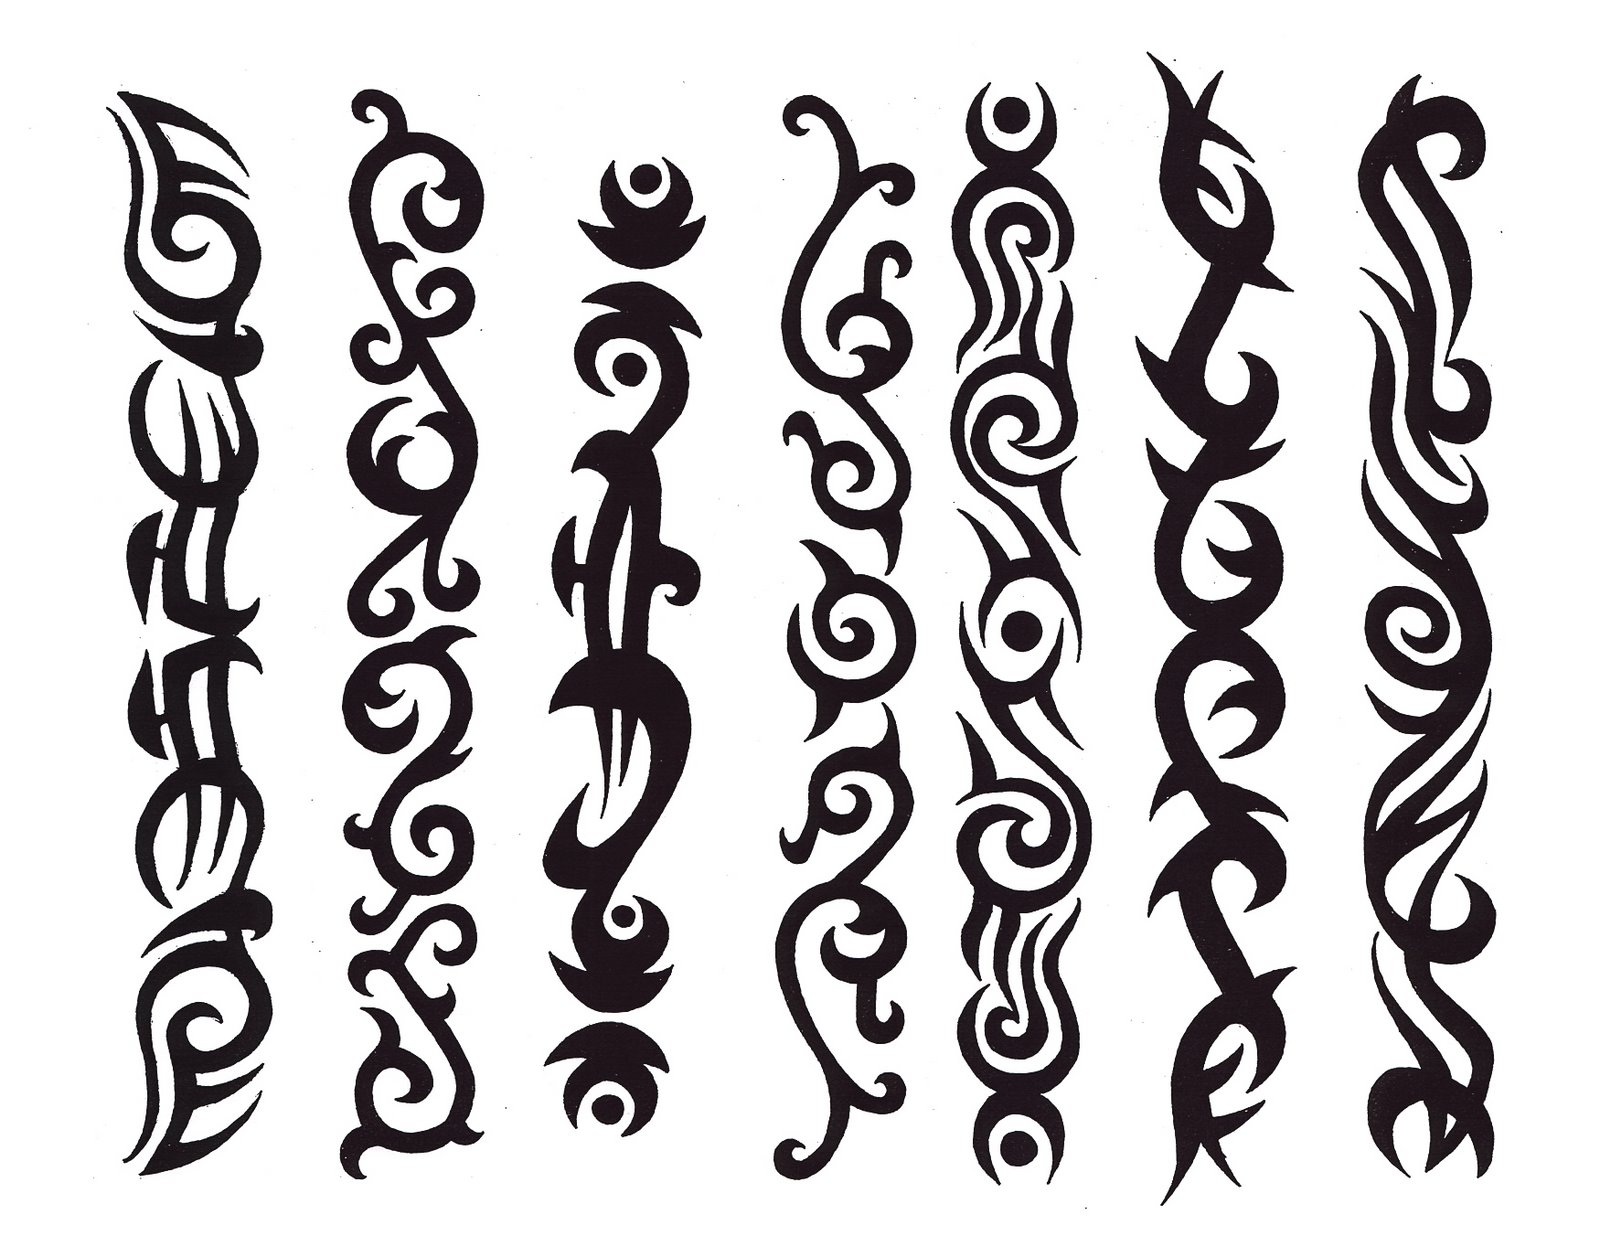 10 Tribal Tattoo Designs   Free Cliparts That You Can Download To You